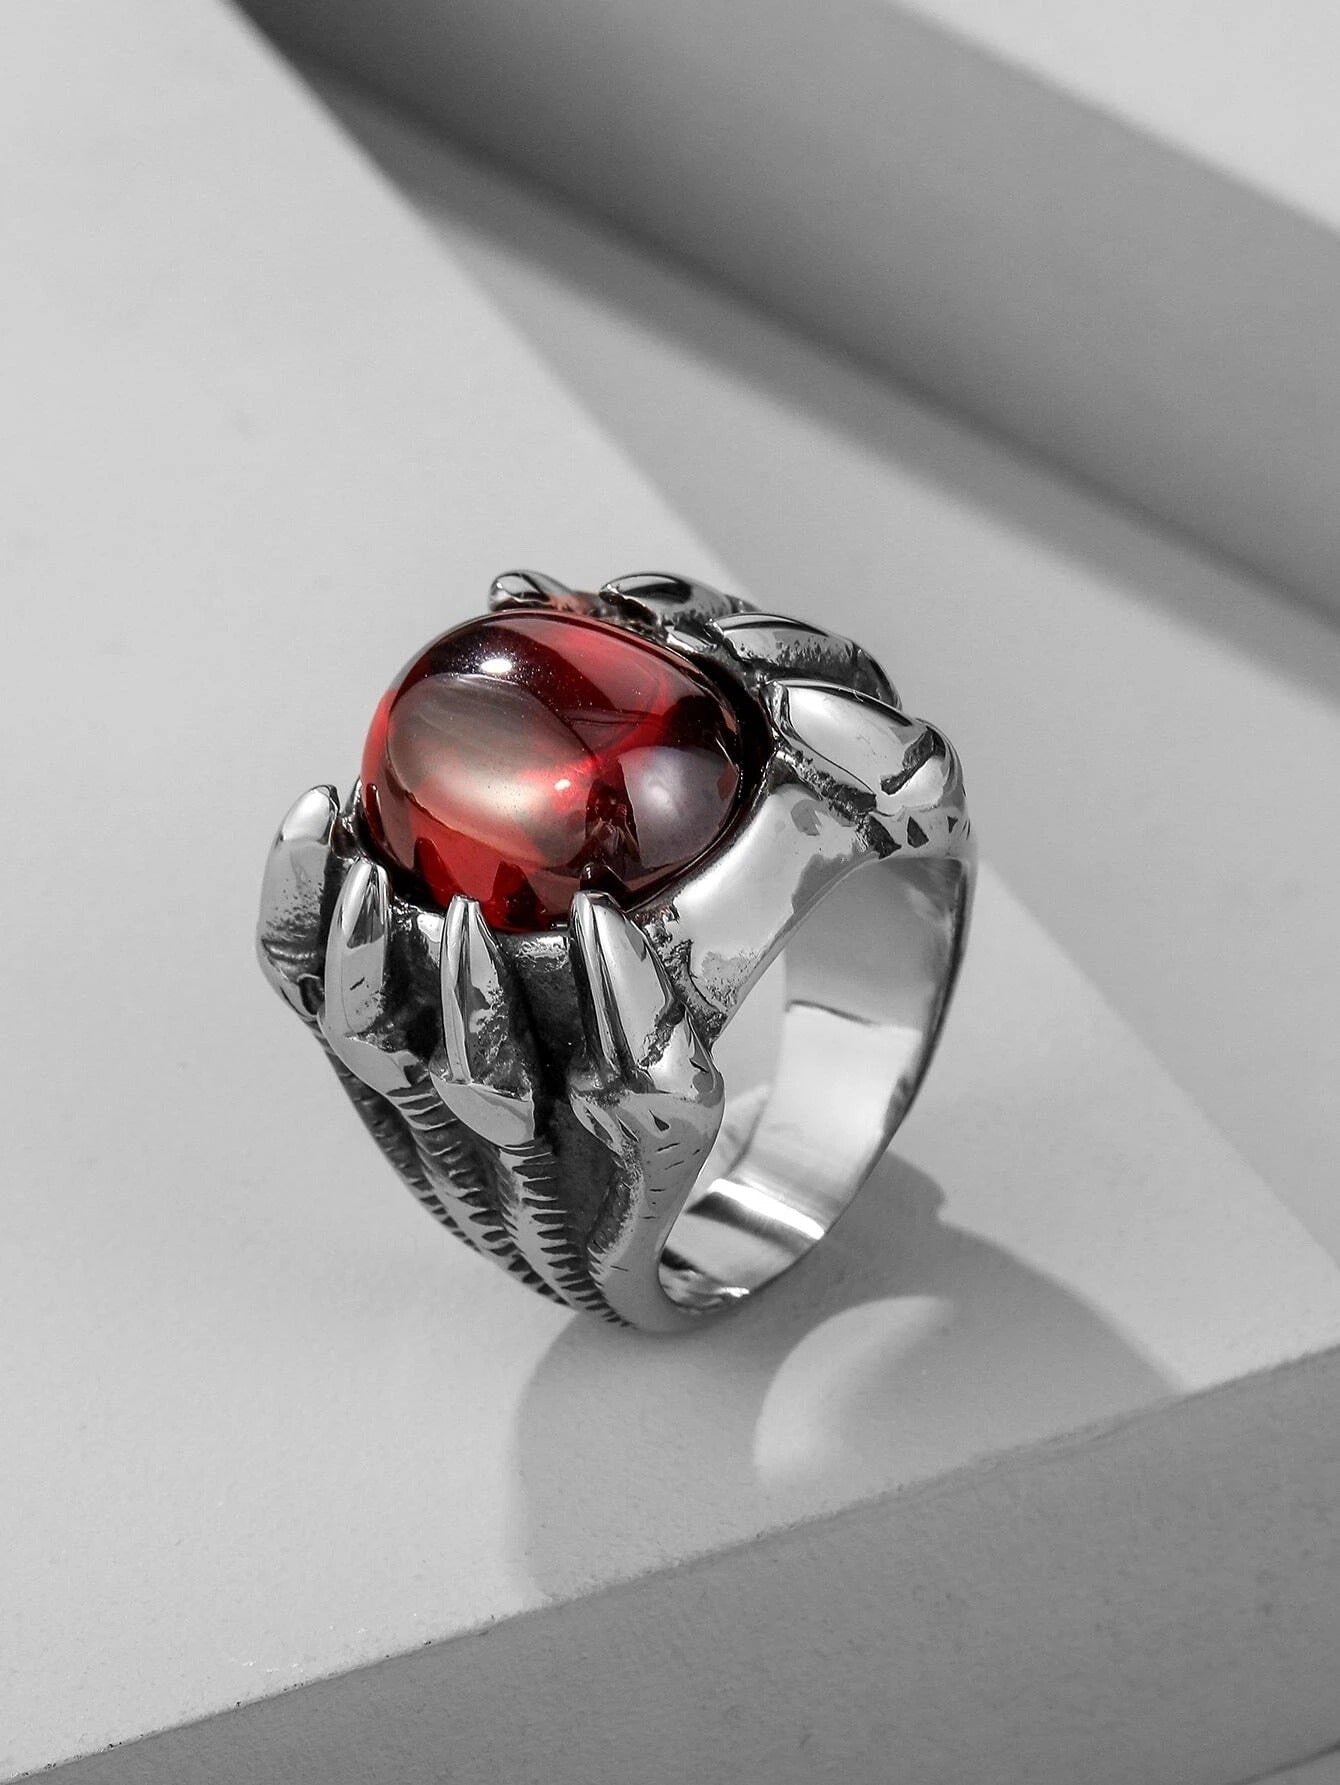 Retro Punk Dragon Claw Huge Red Stone Gothic Ring